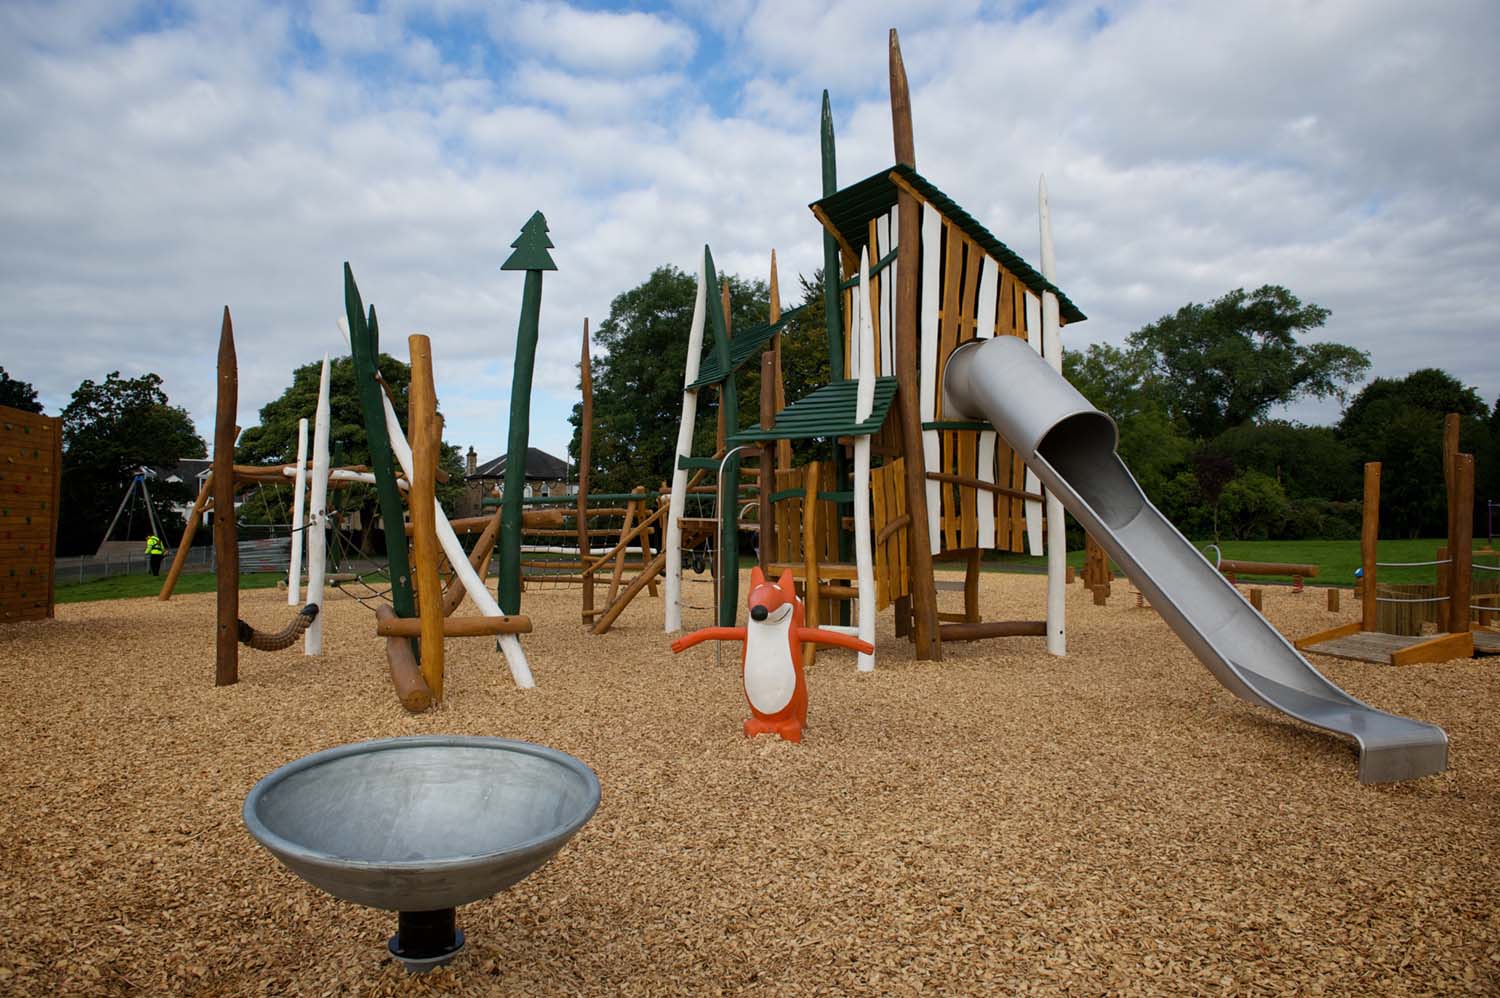 Barshaw Park play area in Paisley